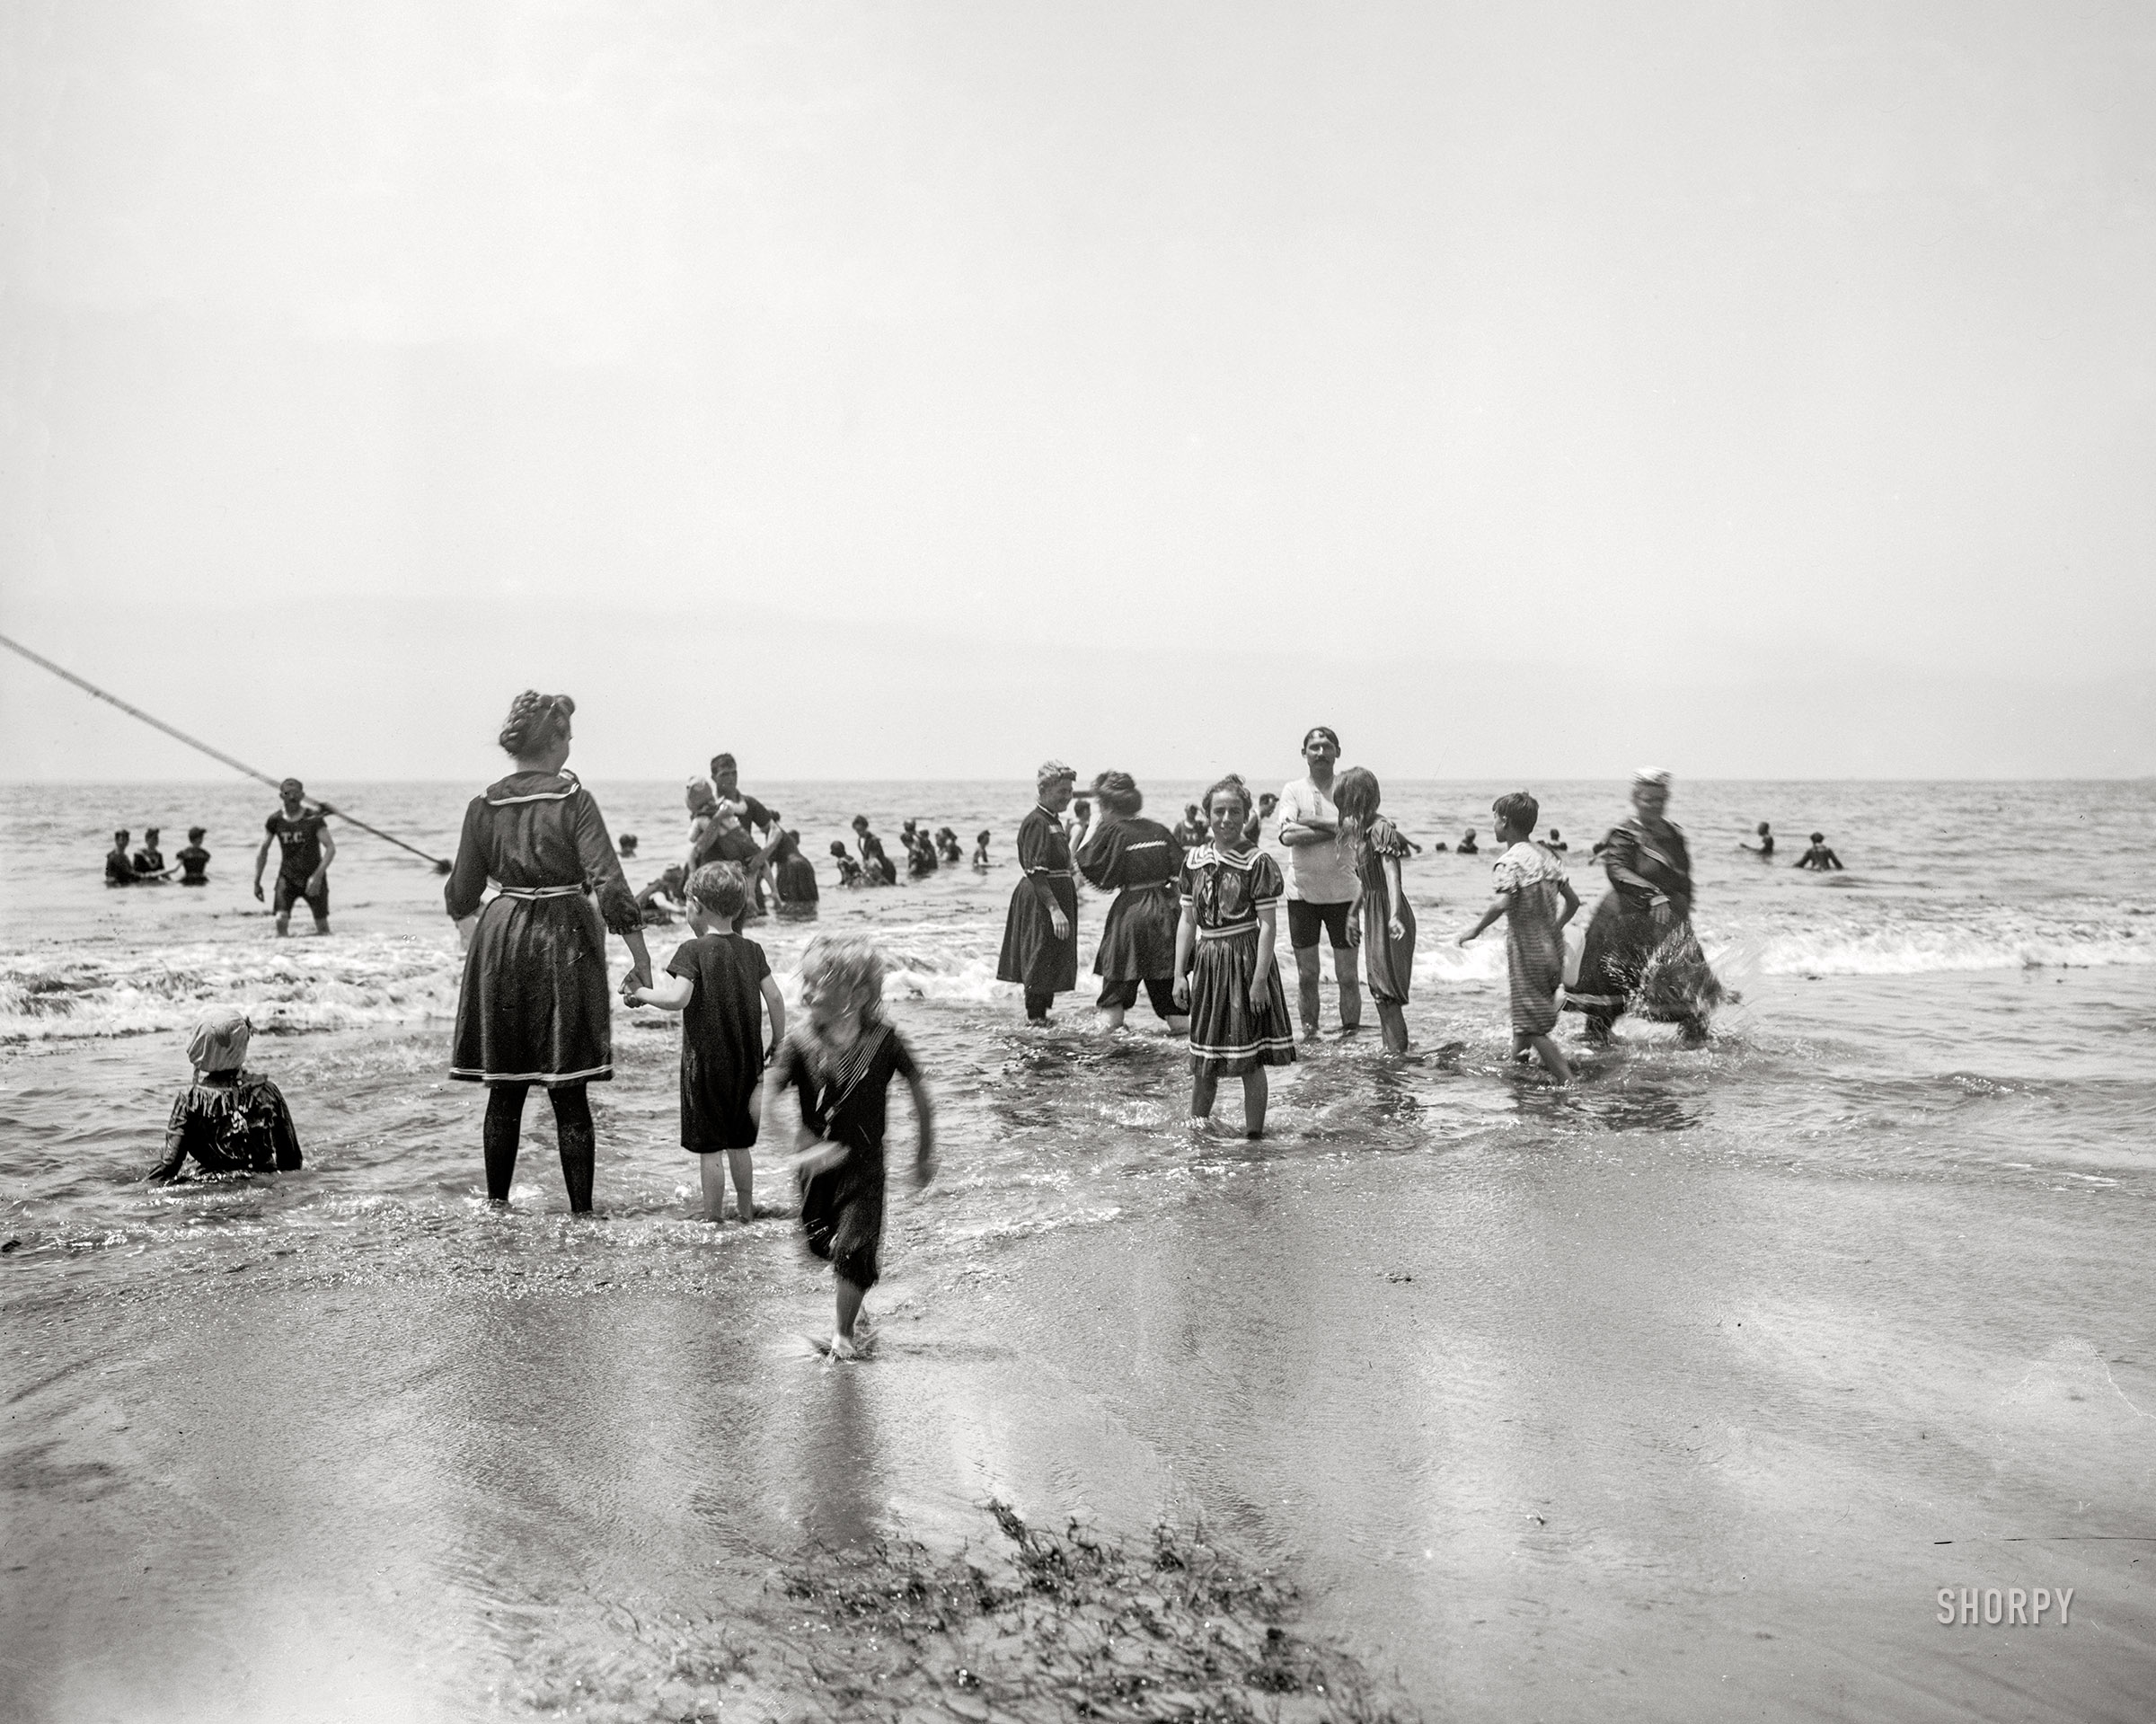 "Surf bathing" is the caption for this circa 1905 photo taken somewhere along the Atlantic Coast. 8x6 inch dry plate glass negative, Detroit Photographic Company. View full size.